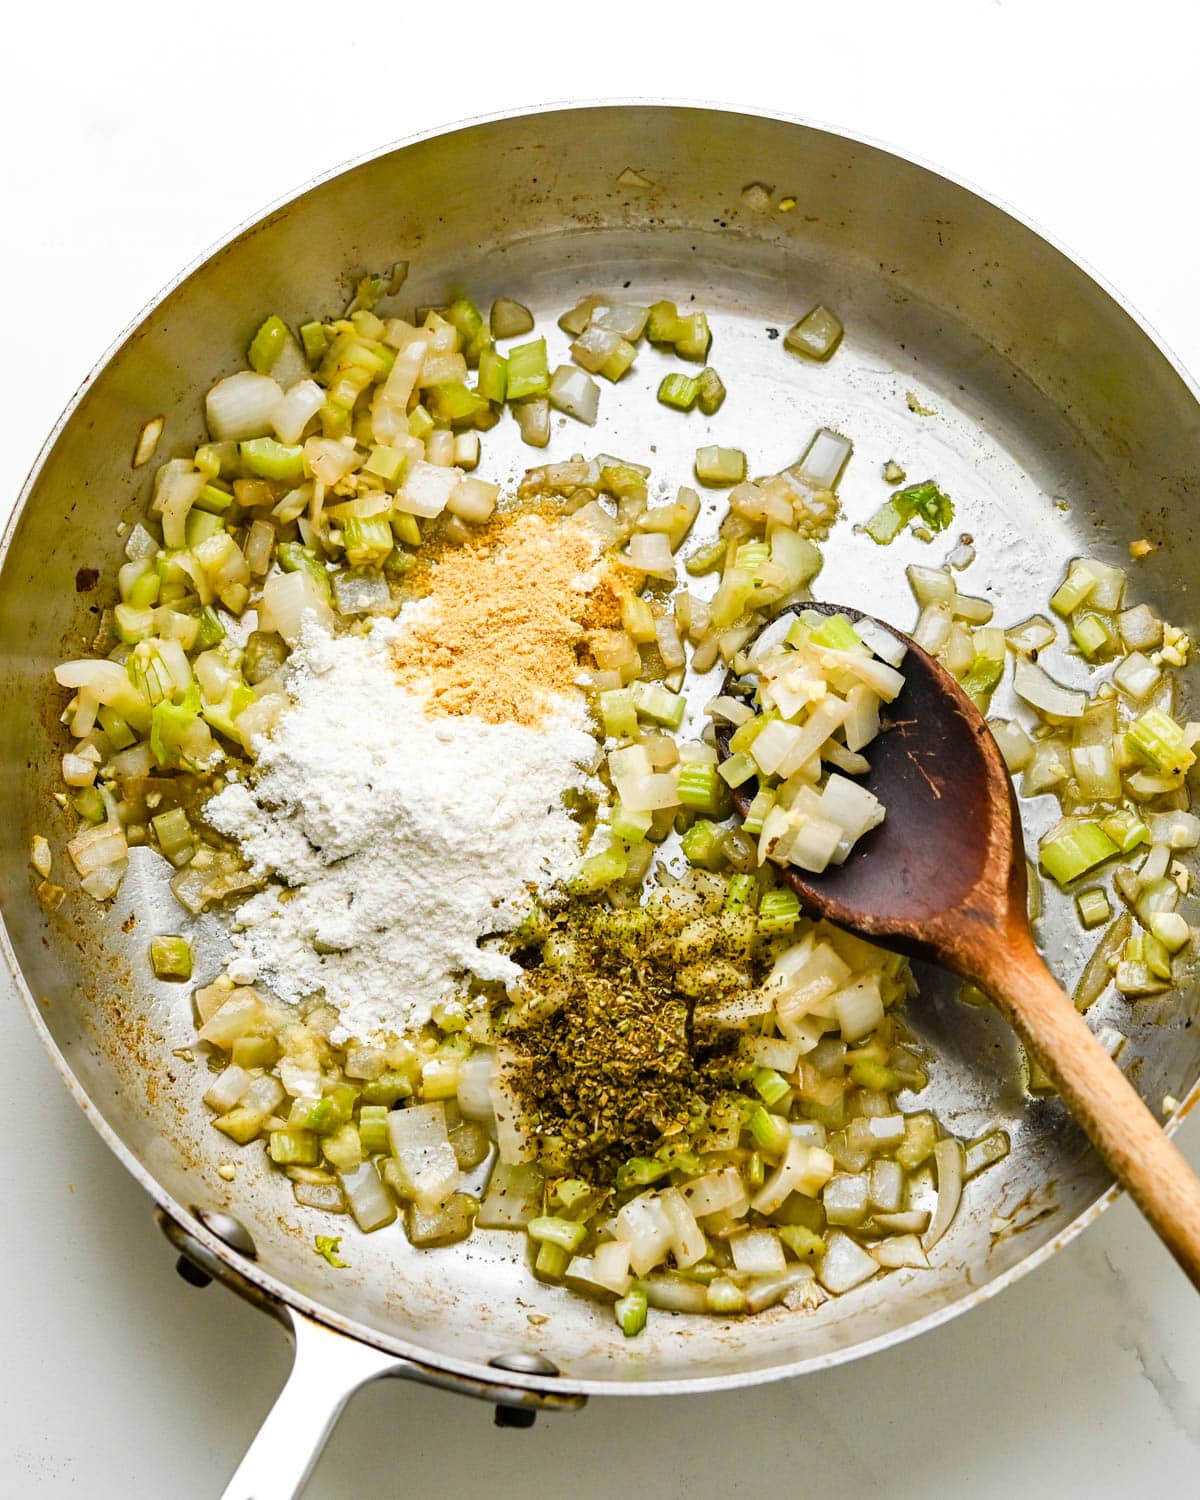 sweating onions, celery and garlic in a skillet and adding flour, dry mustard and oregano.